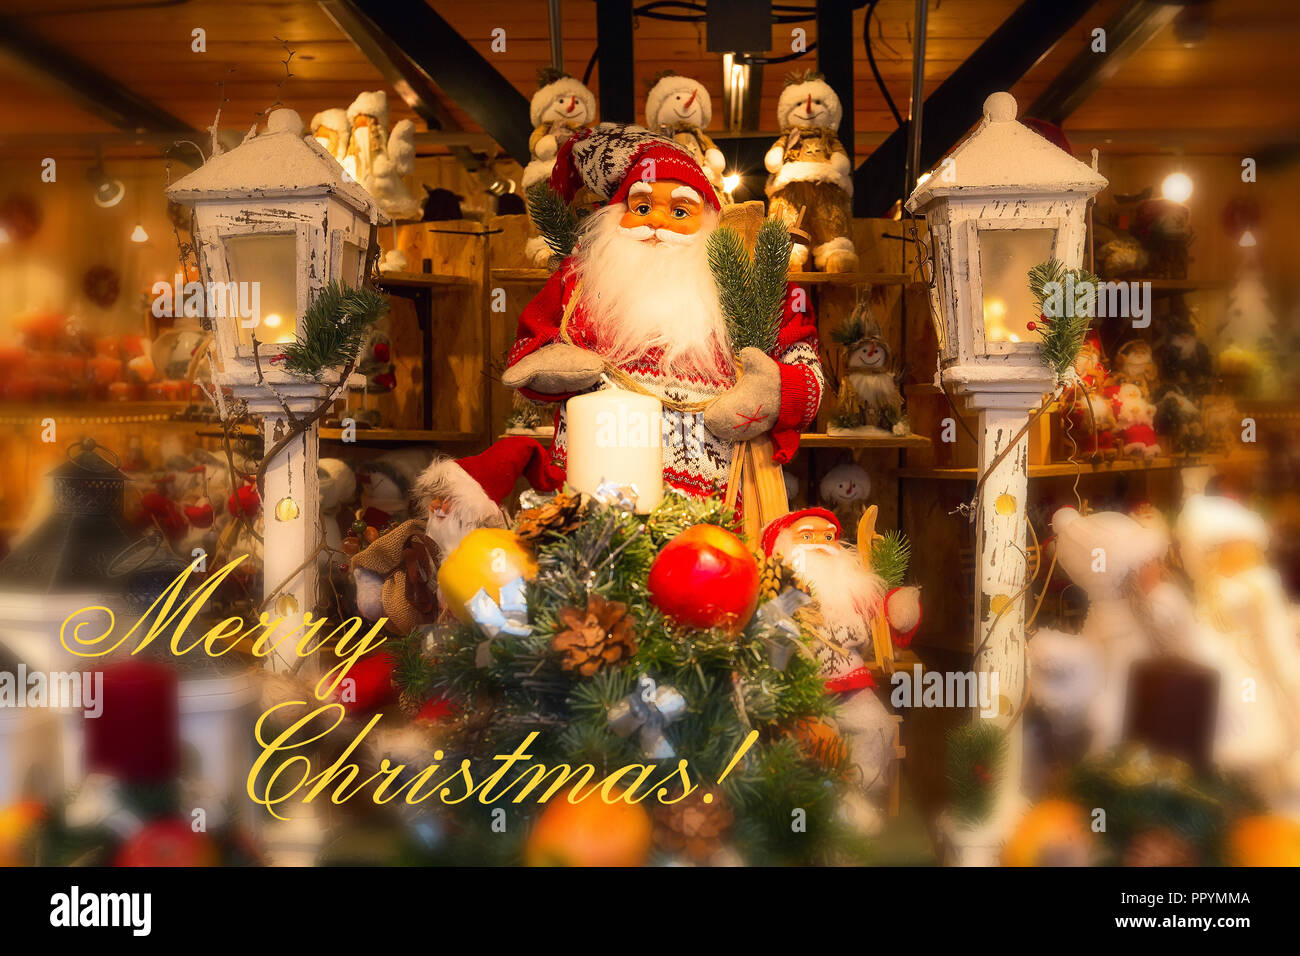 Merry Christmas postcard with Santa Claus figurine and Christmas tree, gifts Stock Photo